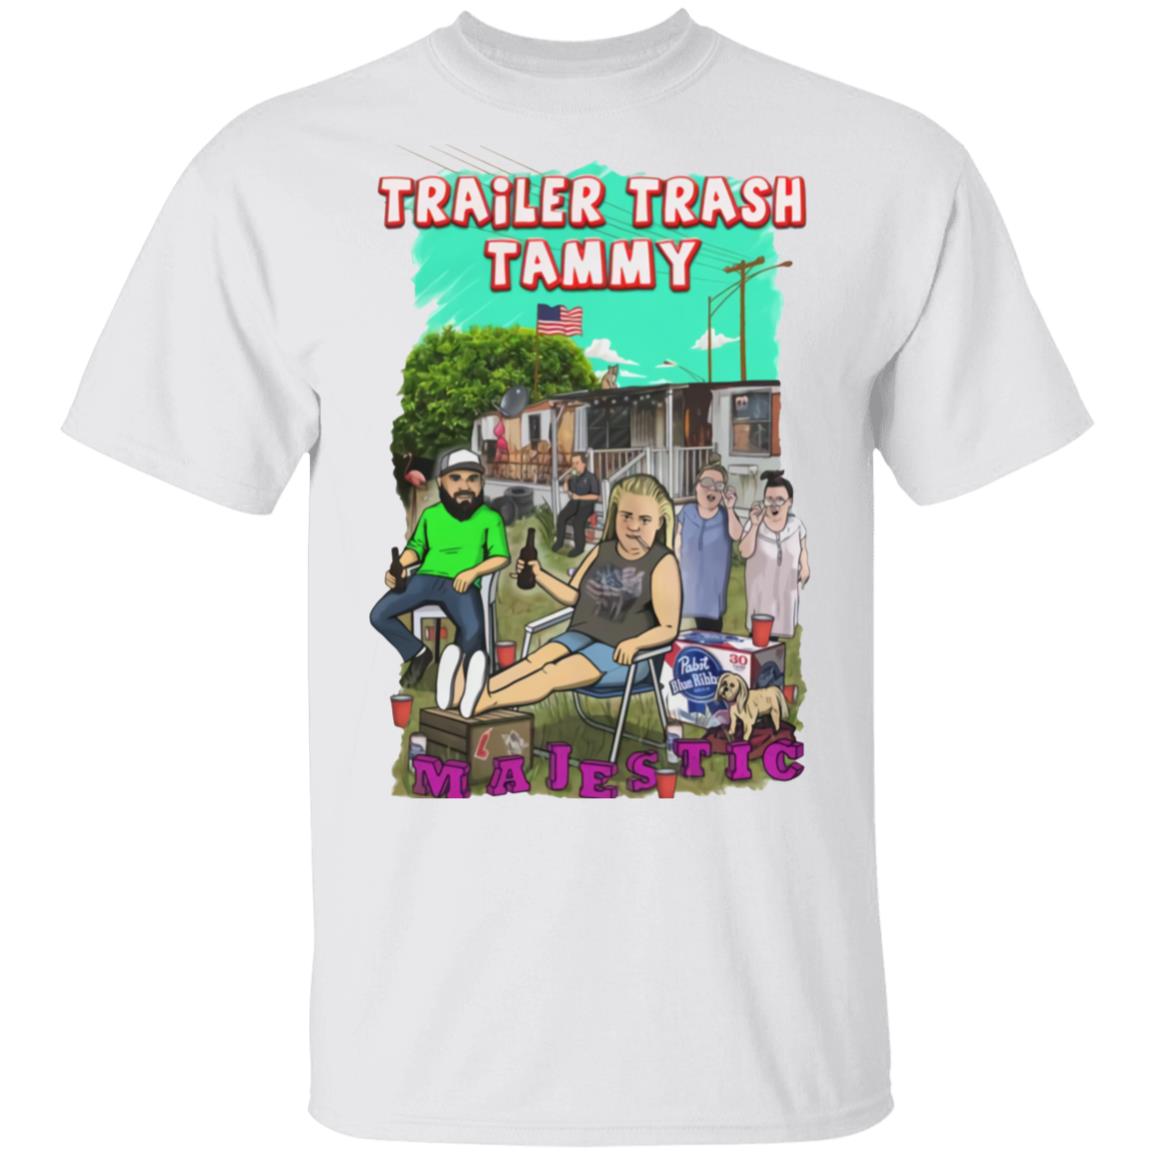 Amazing show so far, and great participants. trailer trash tammy t shirt Pr...